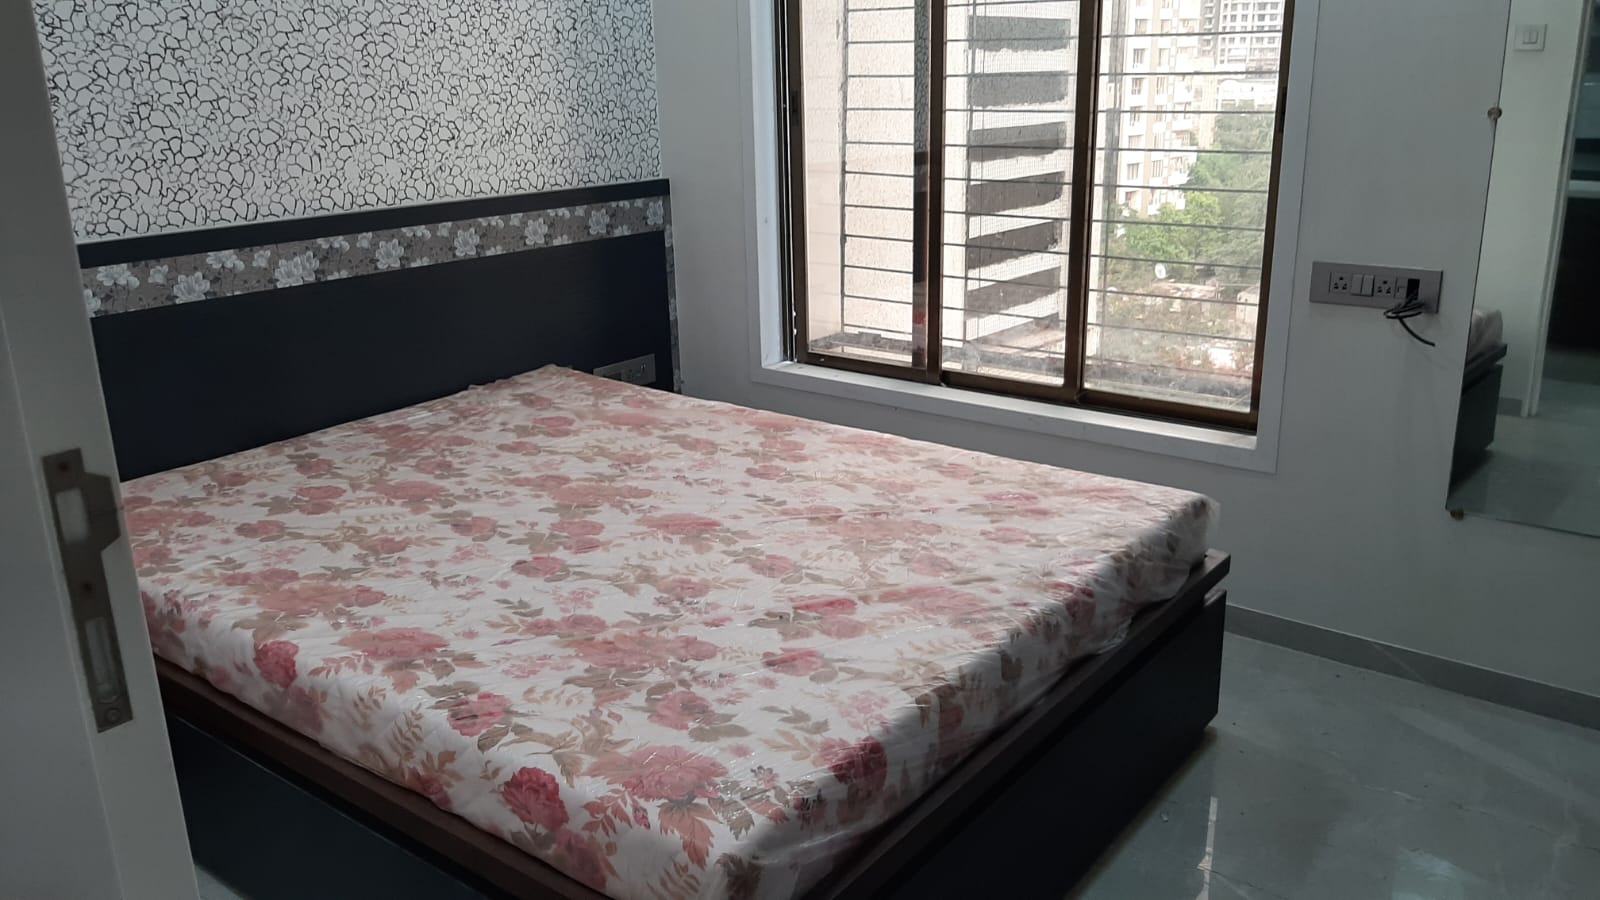 Available 3 bhk flat for sale in Malad West. Find properties